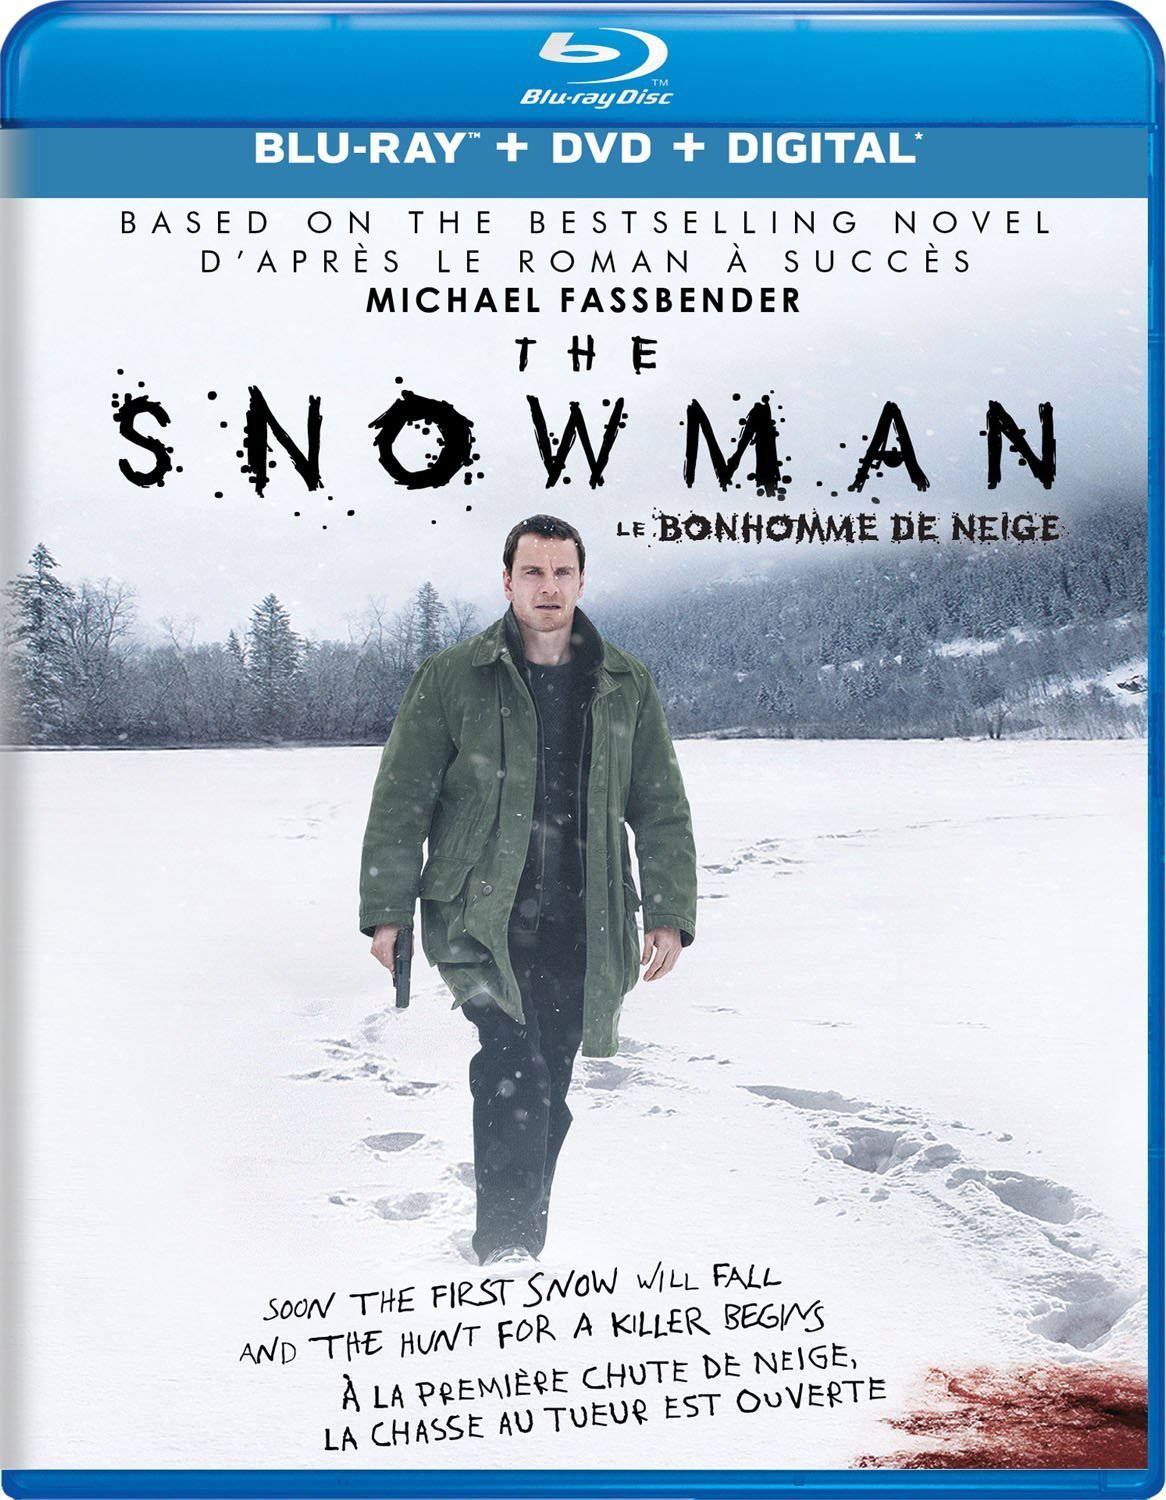 The Snowman now available on Blu-ray, DVD and Digital HD